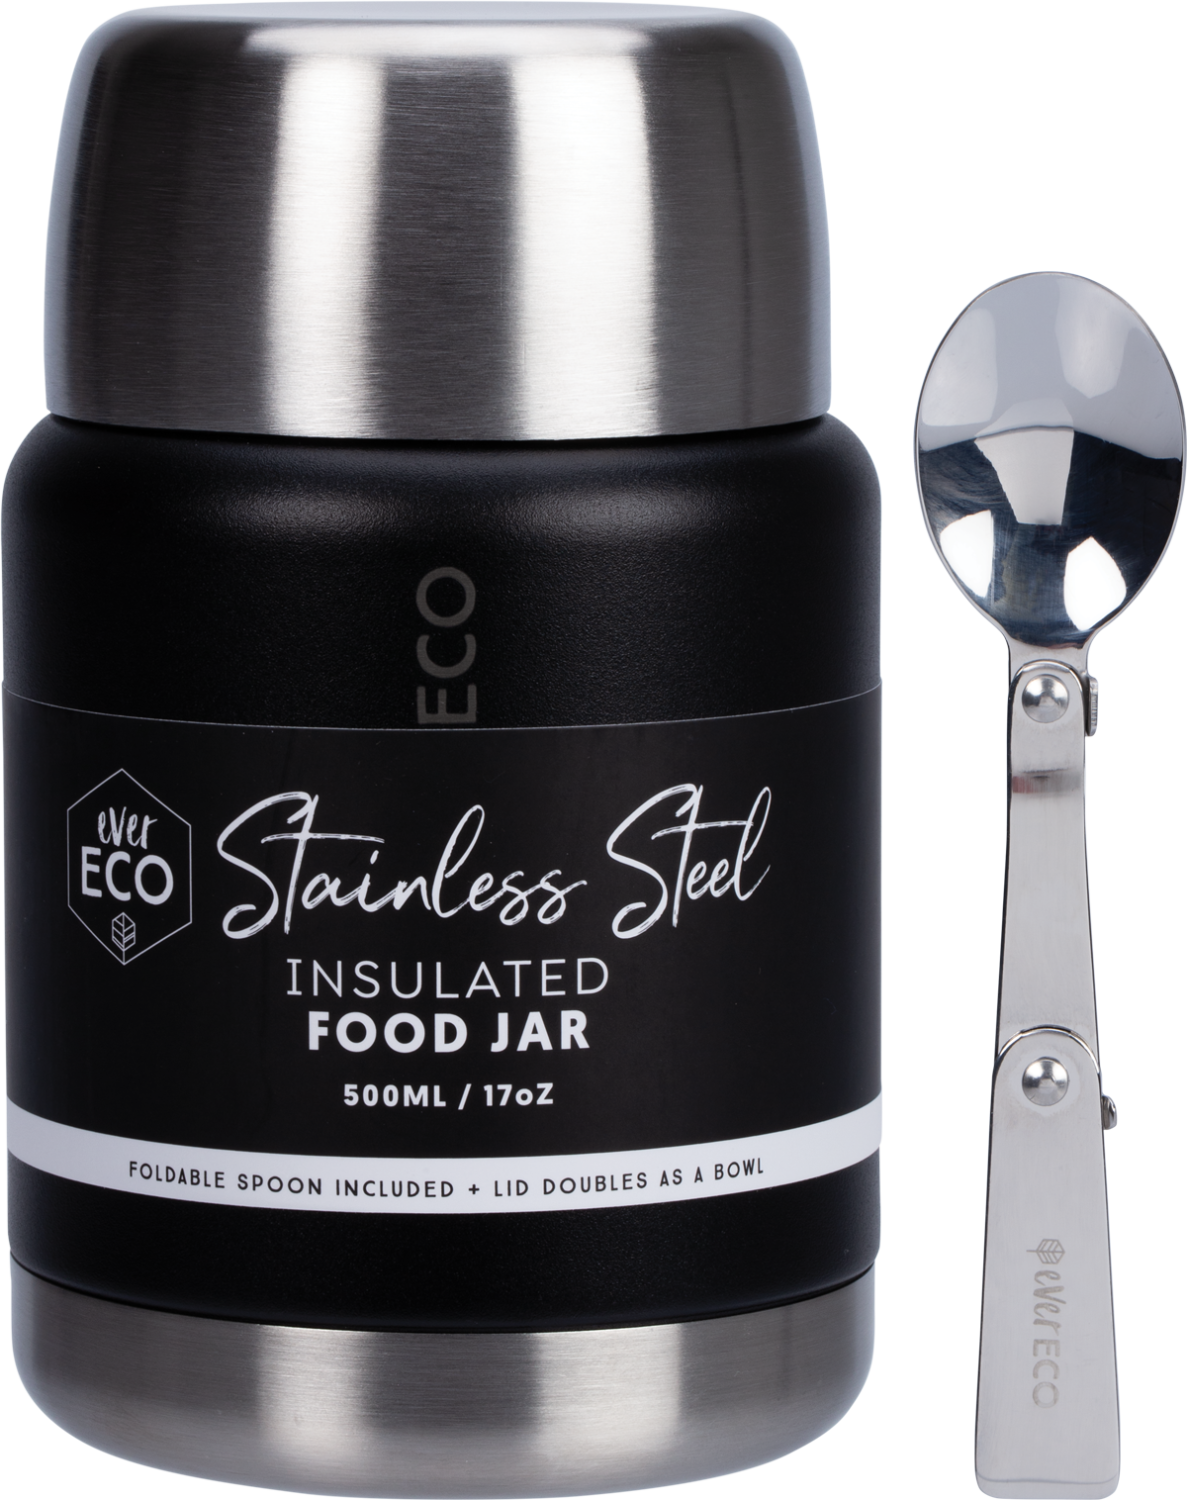 Ever Eco Stainless Steel Insulated Food Jar 500ml Onyx